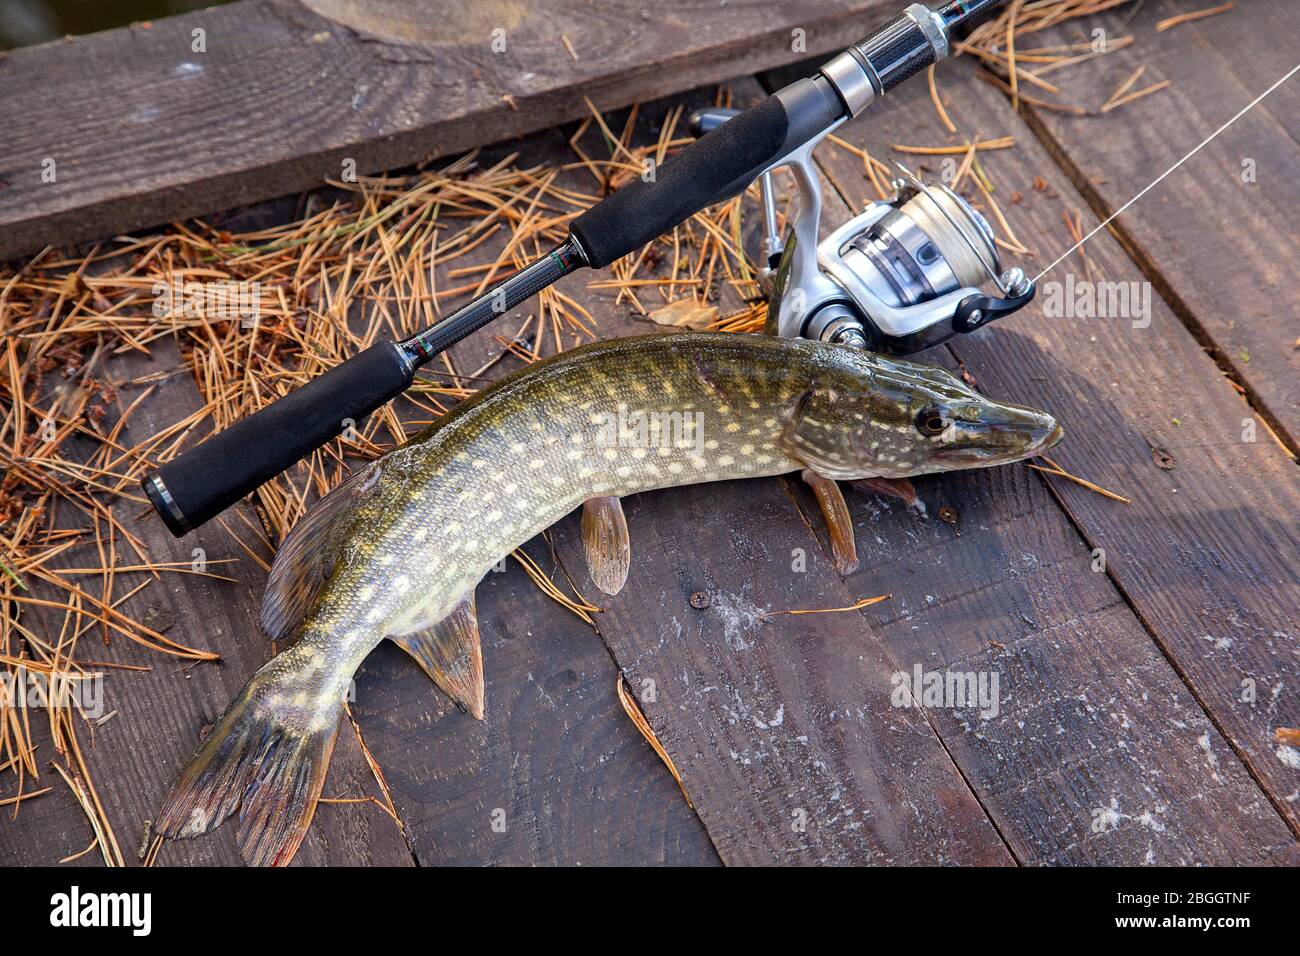 https://c8.alamy.com/comp/2BGGTNF/freshwater-northern-pike-fish-know-as-esox-lucius-and-fishing-rod-with-reel-lying-on-vintage-wooden-background-with-yellow-leaves-at-autumn-time-fish-2BGGTNF.jpg